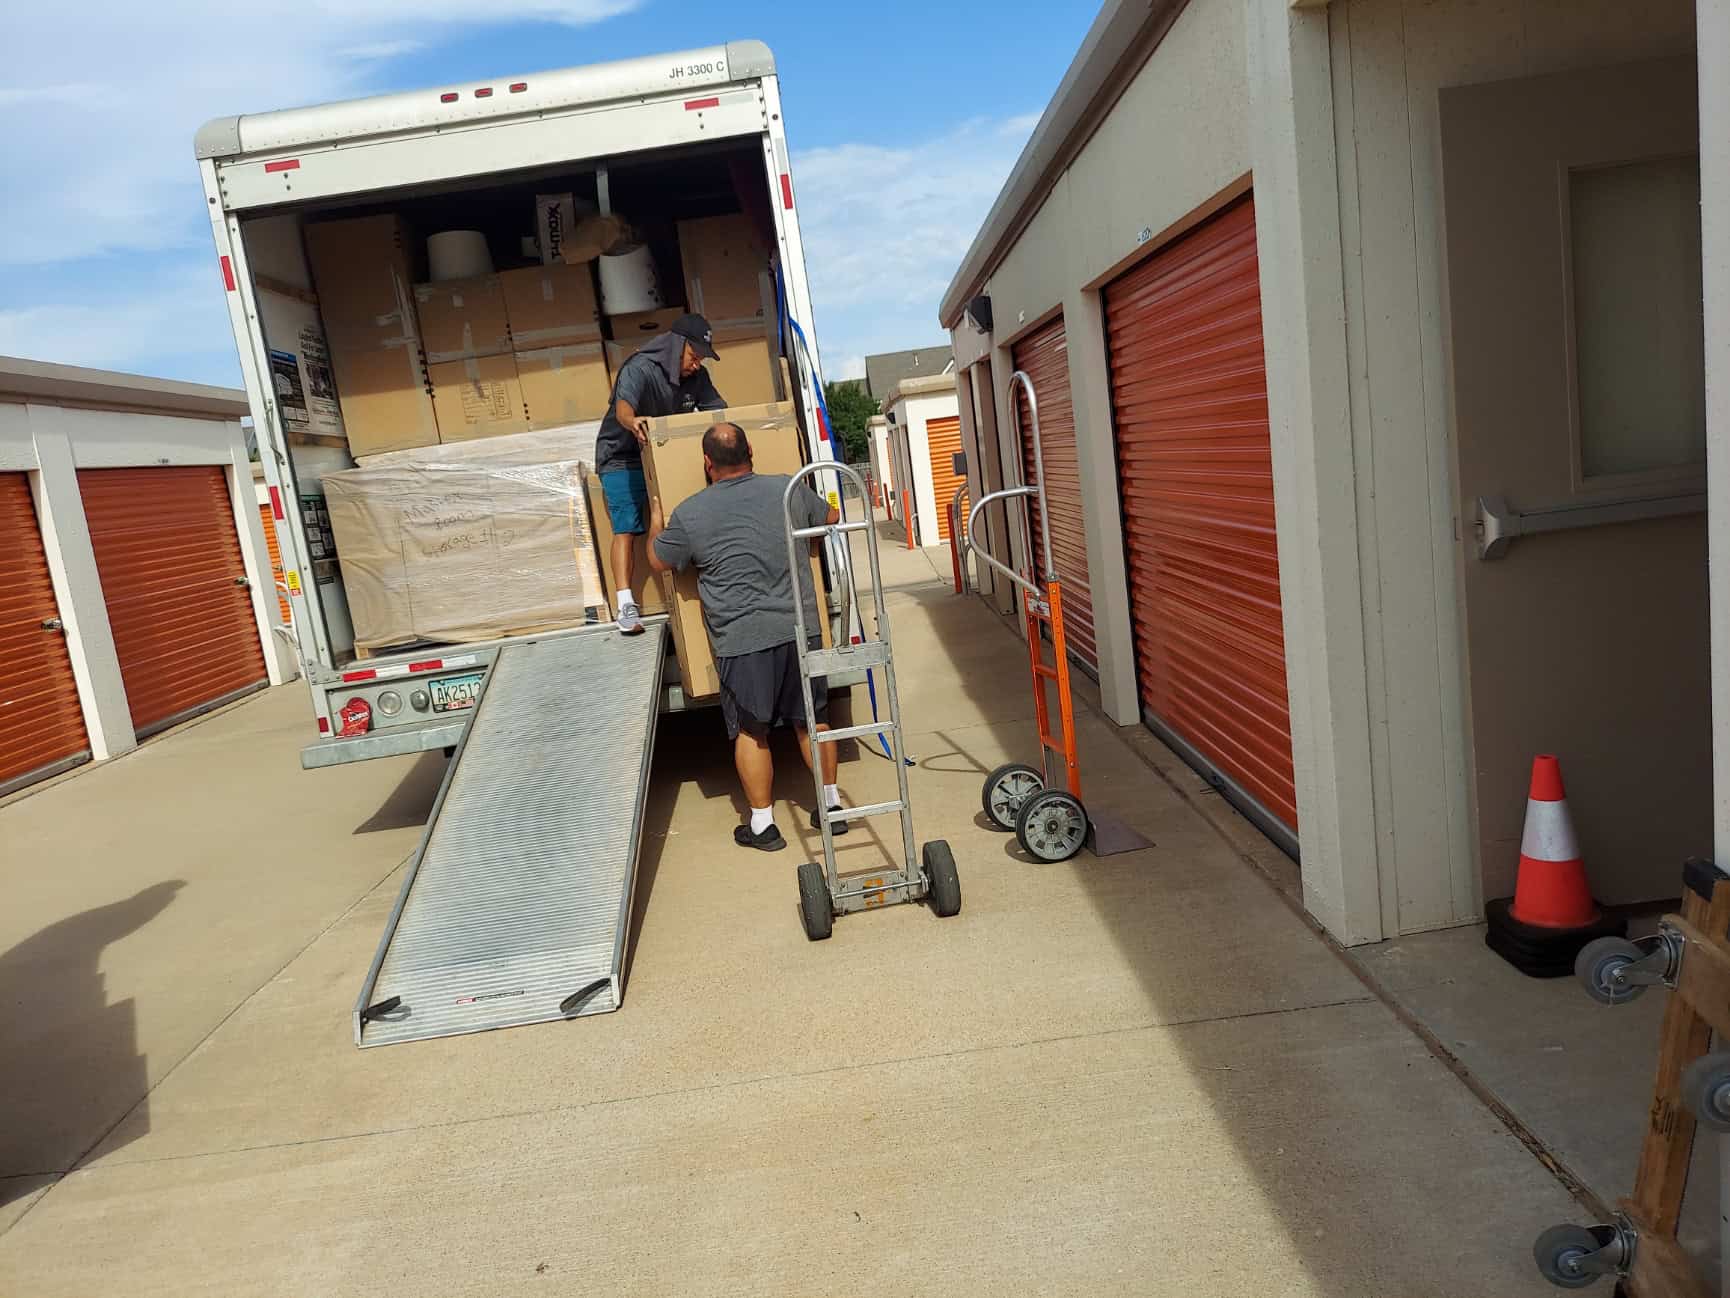 Local Moving Company Services - Frontier Moving, LLC